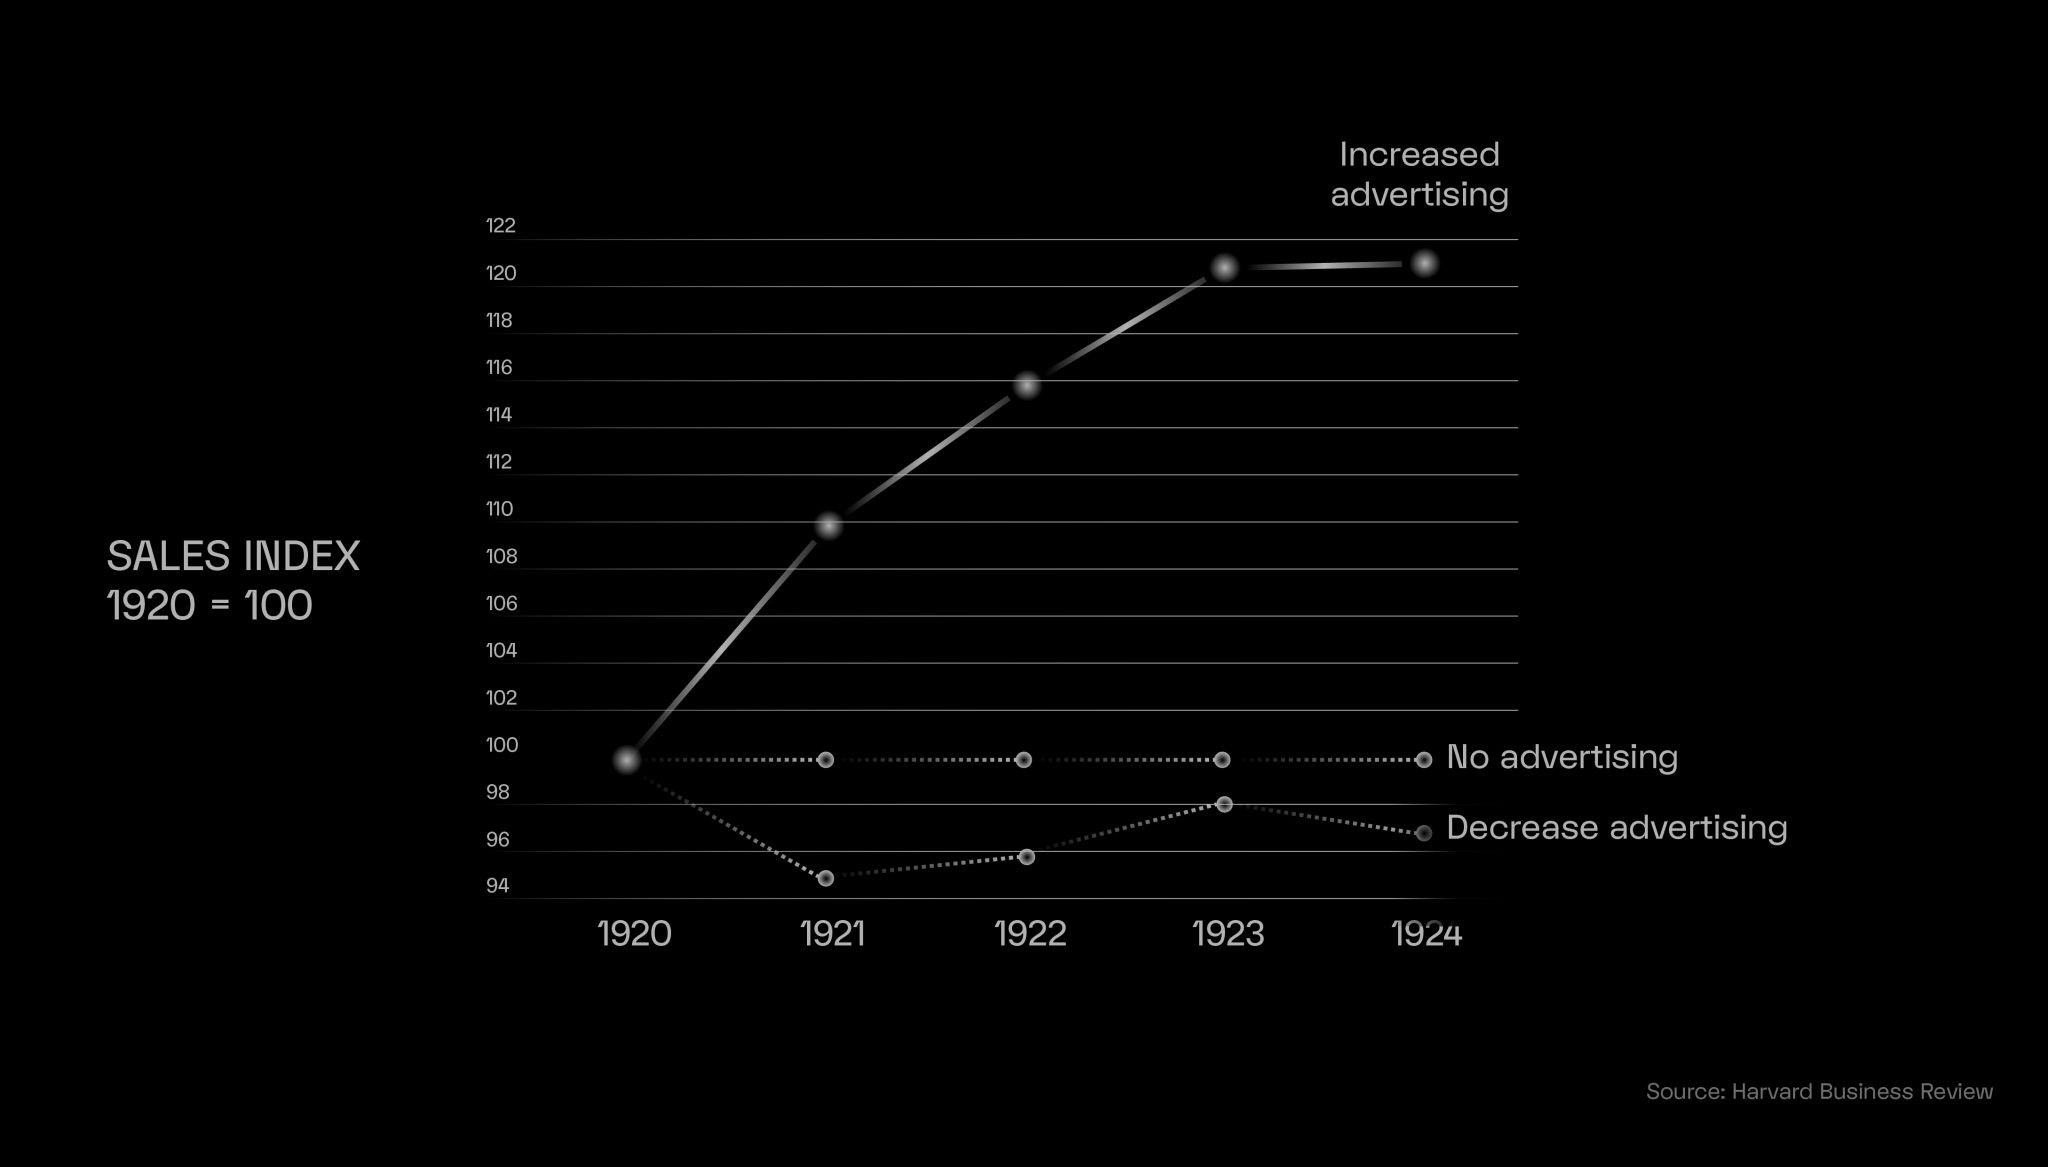 Chart showing the use of advertiisng during the 1920s great depression